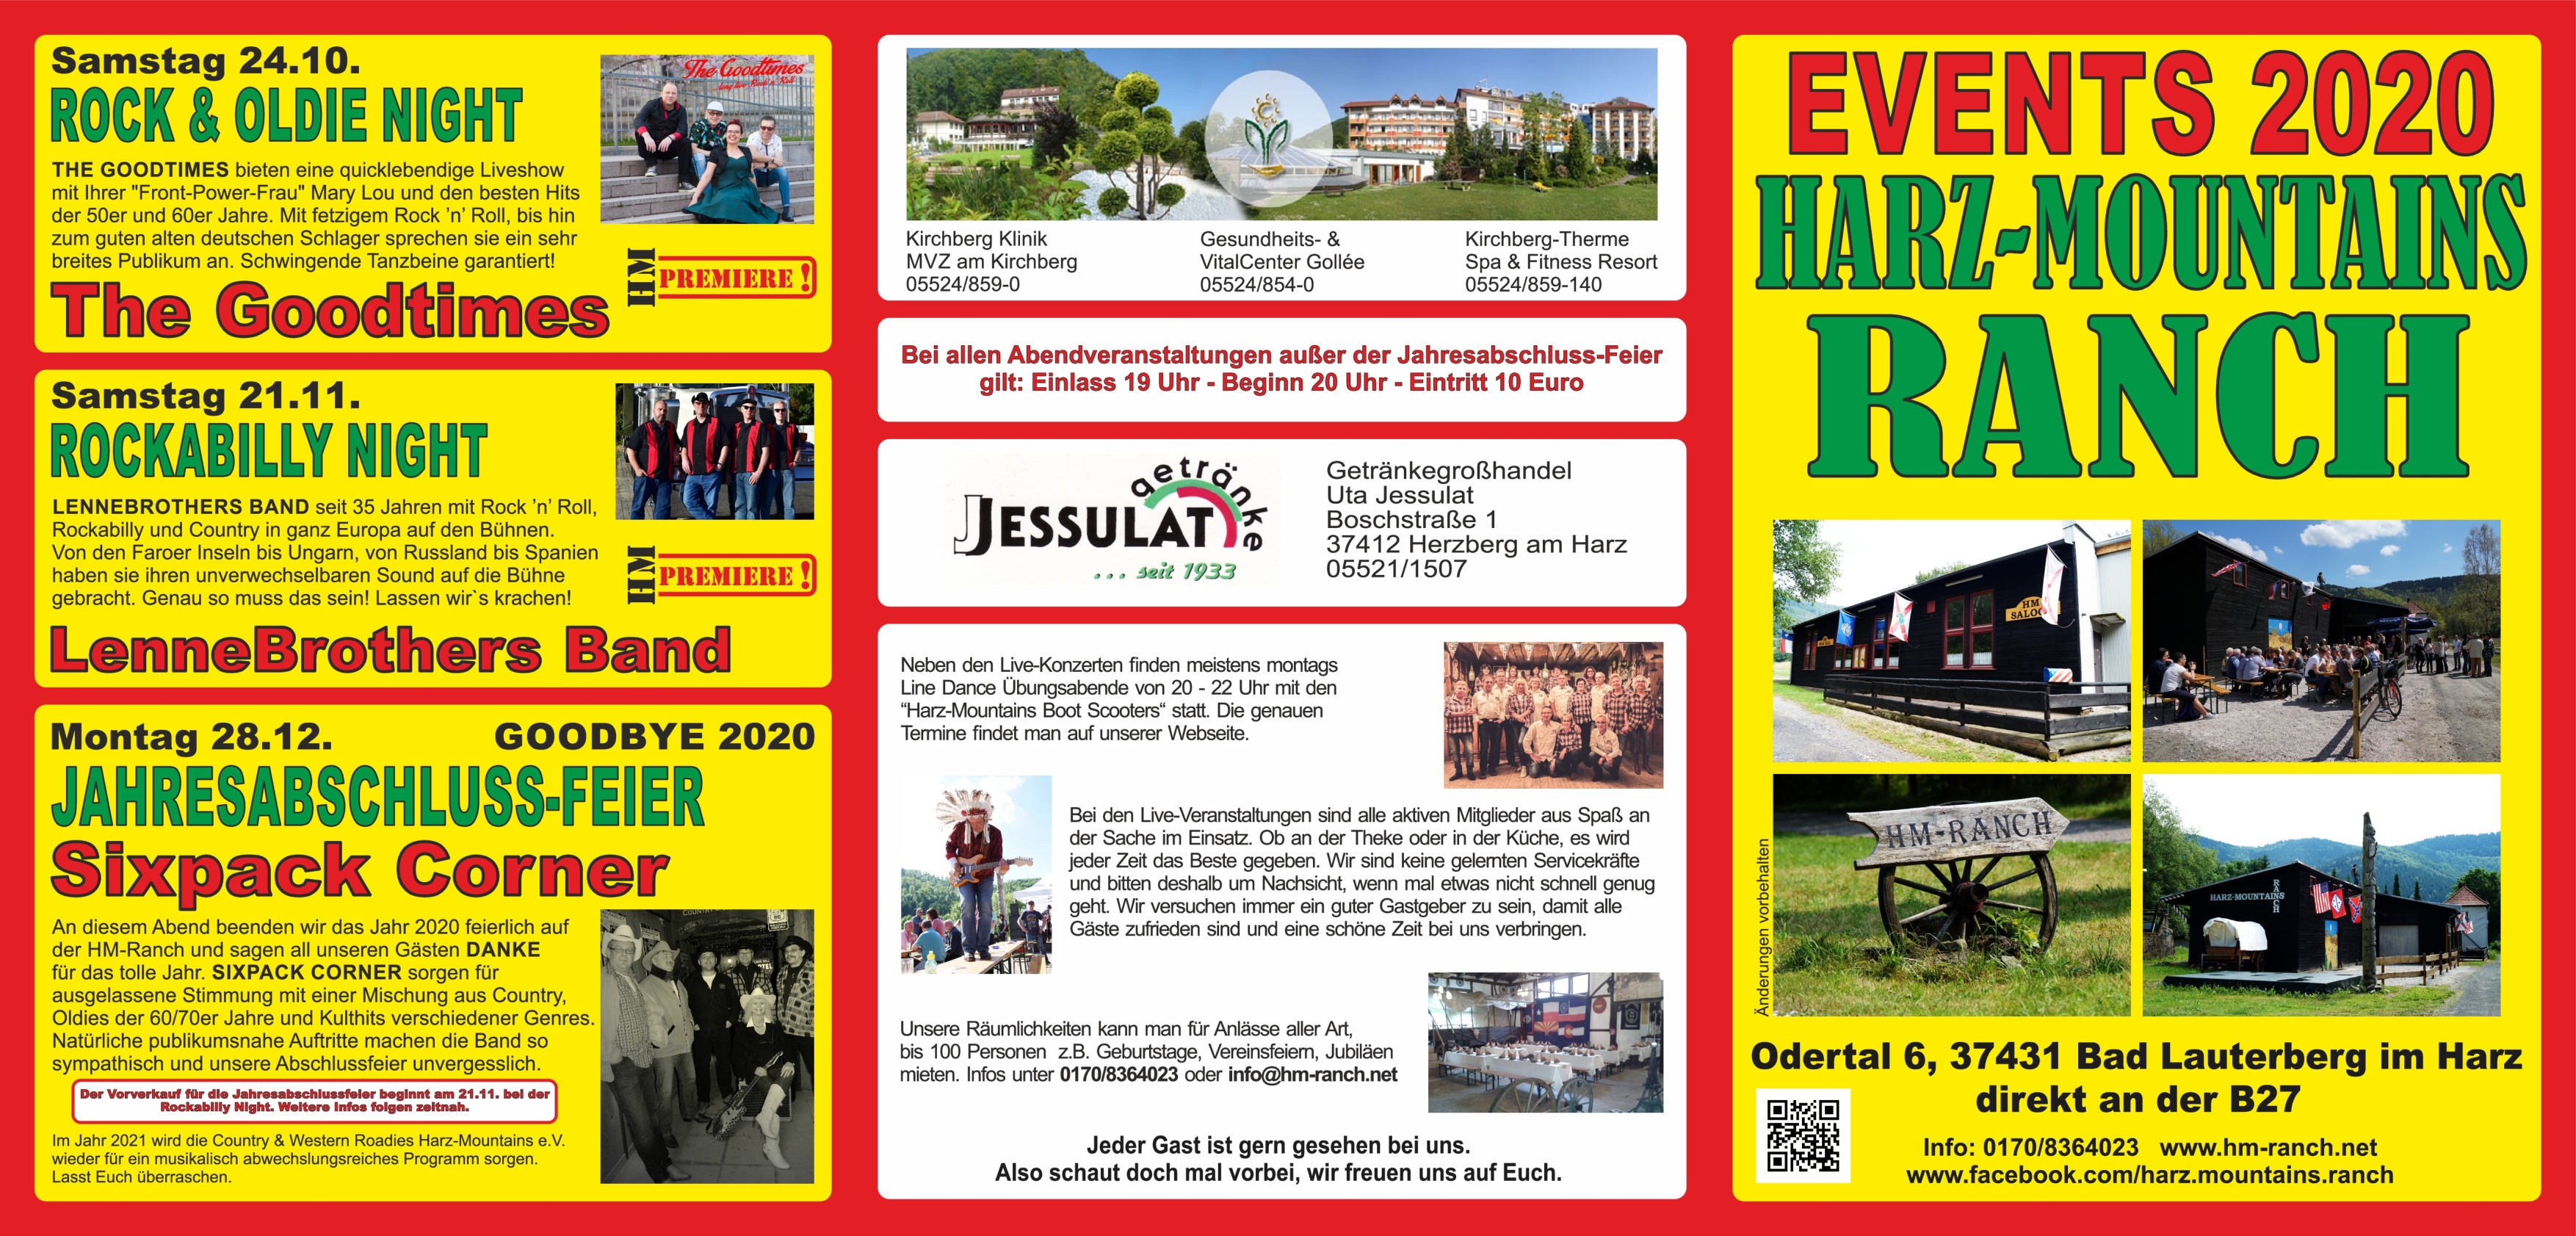 Events 2020 Country & Western Roadies Harz Mountains e.V 37431 Bad Lauterberg im Harz 001